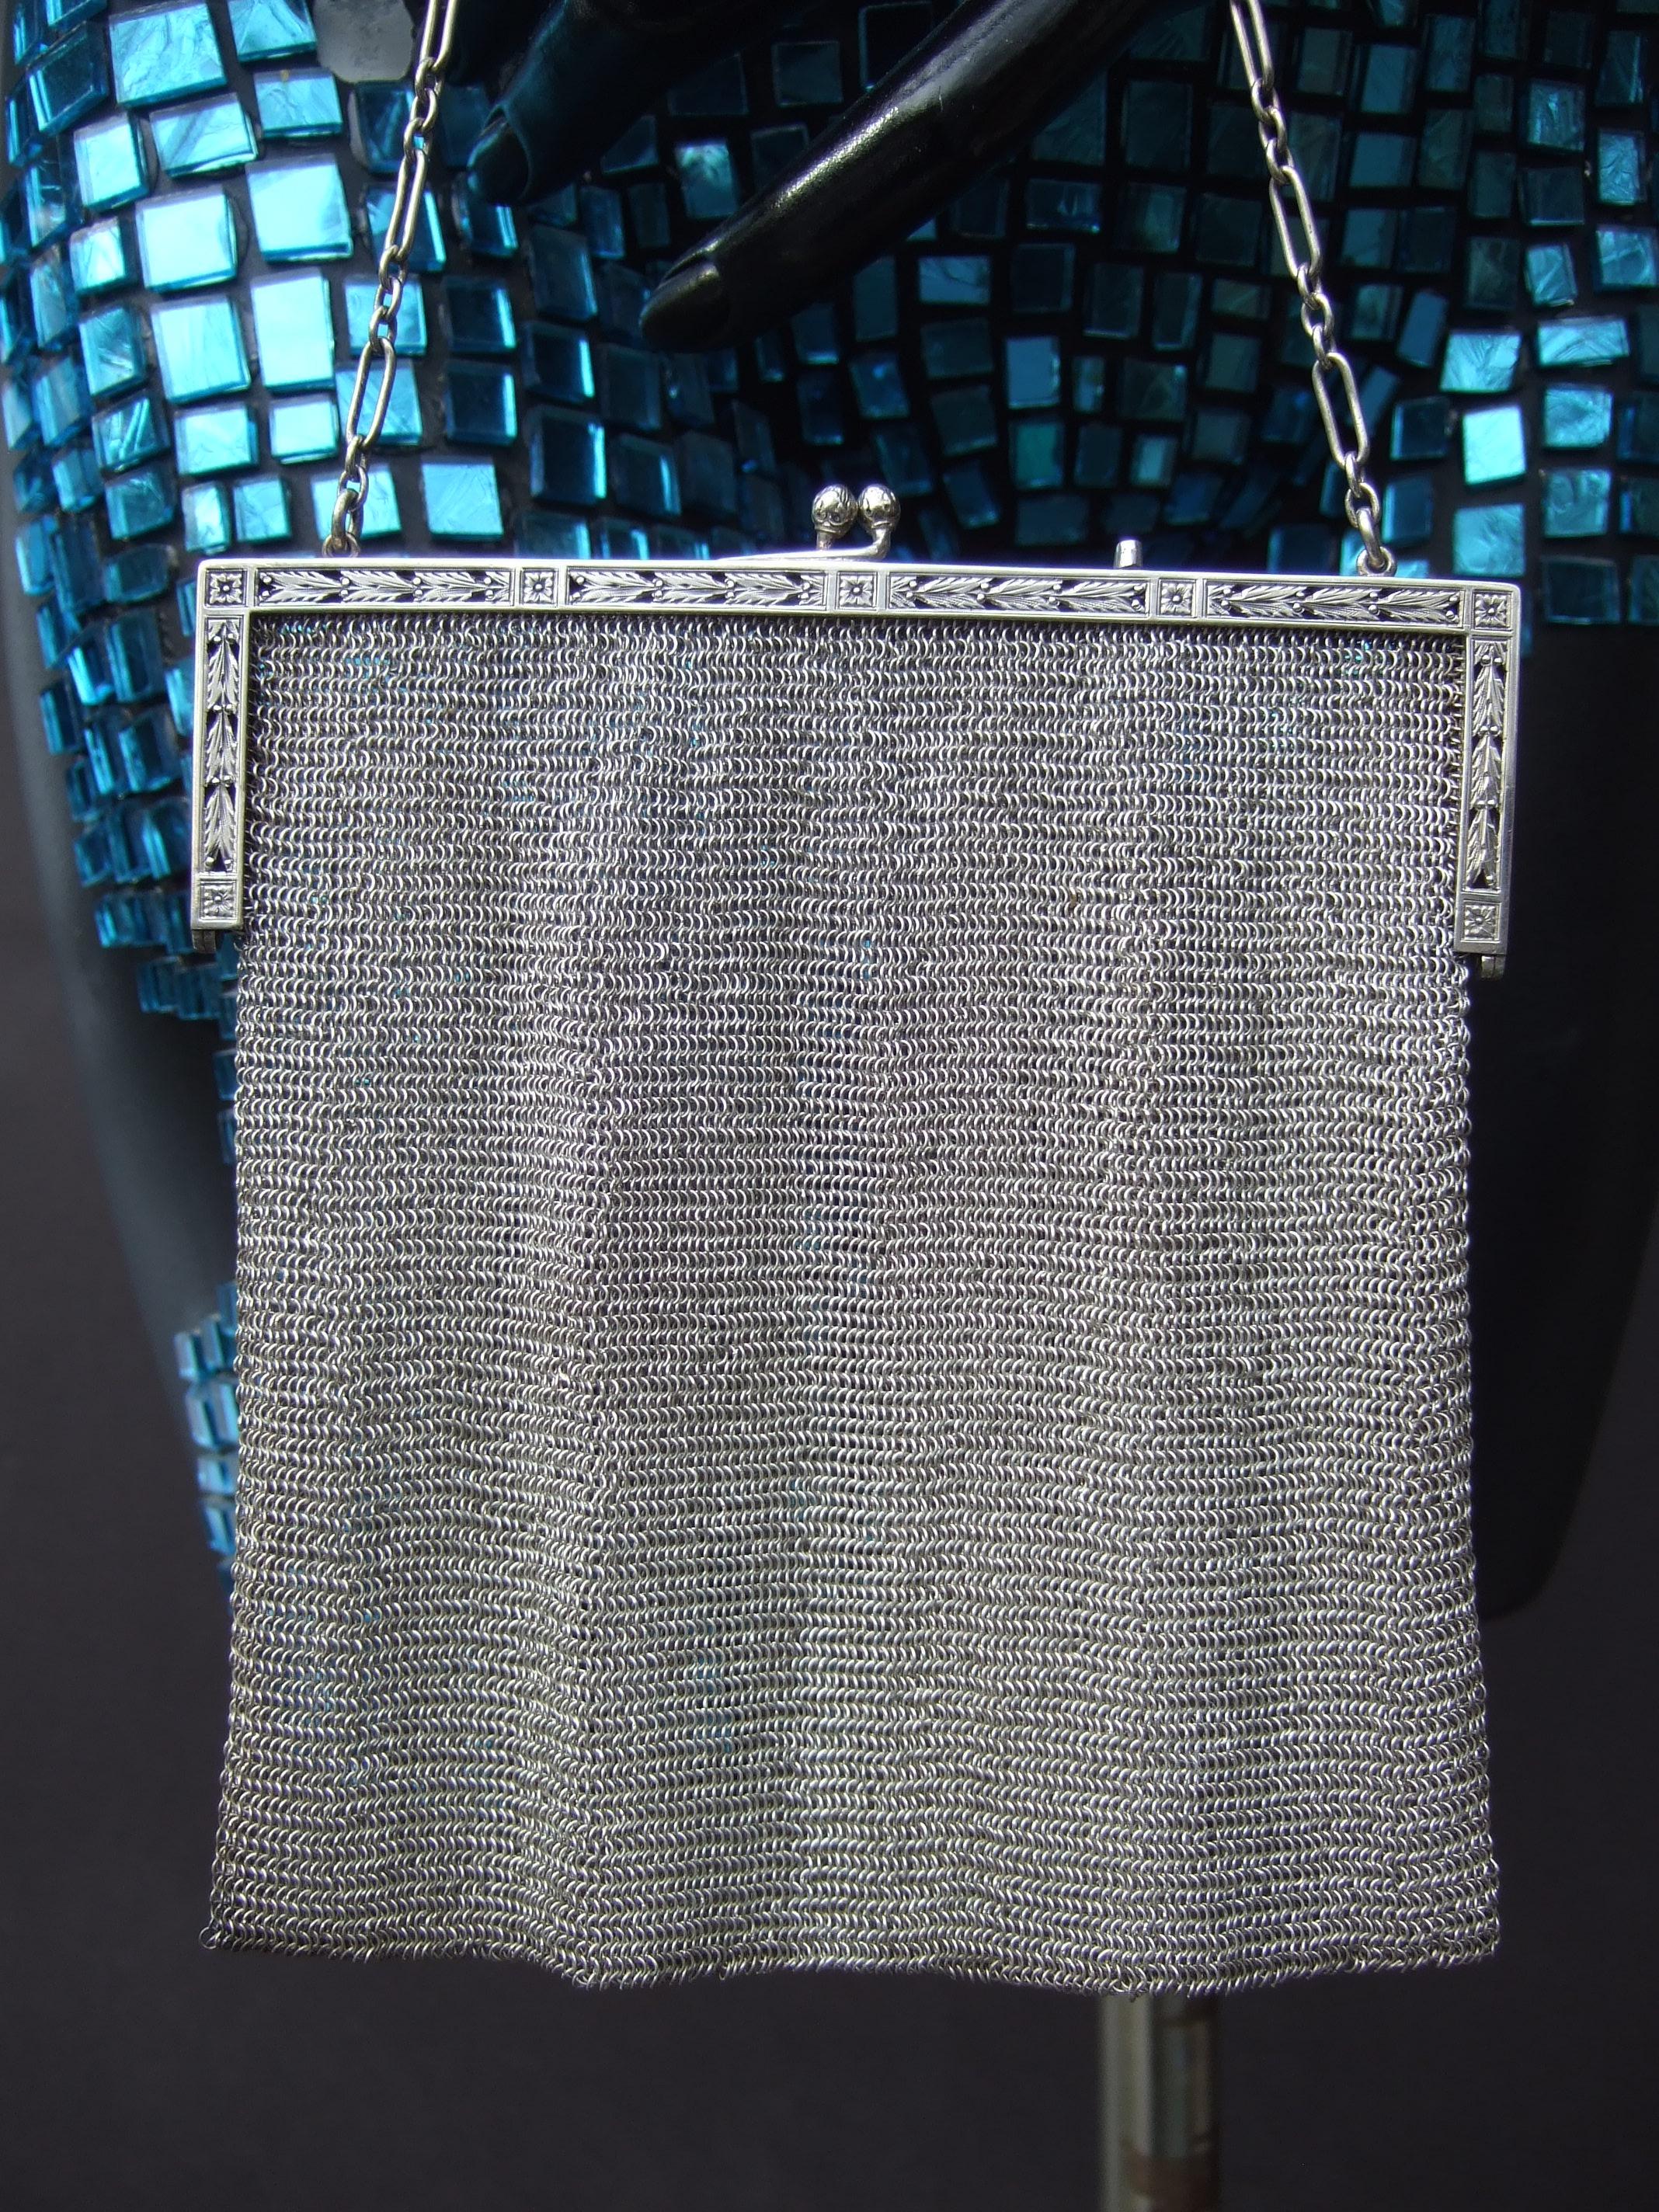 Tiffany & Co. Rare Sterling Silver Chain Mail Evening Bag c 1910 4